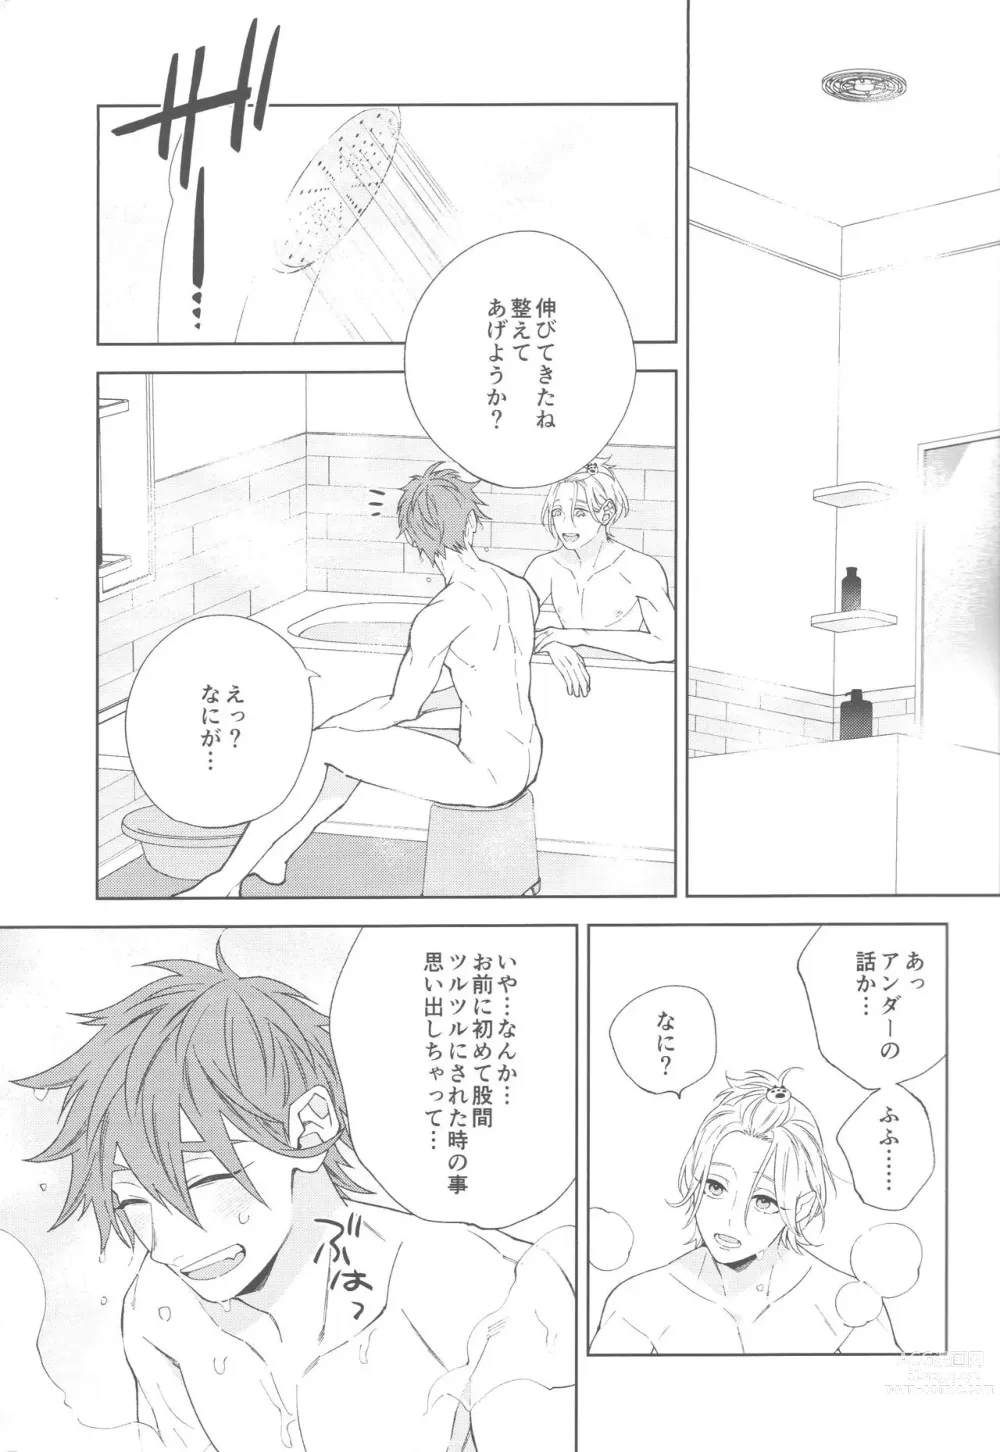 Page 4 of doujinshi SHAVED